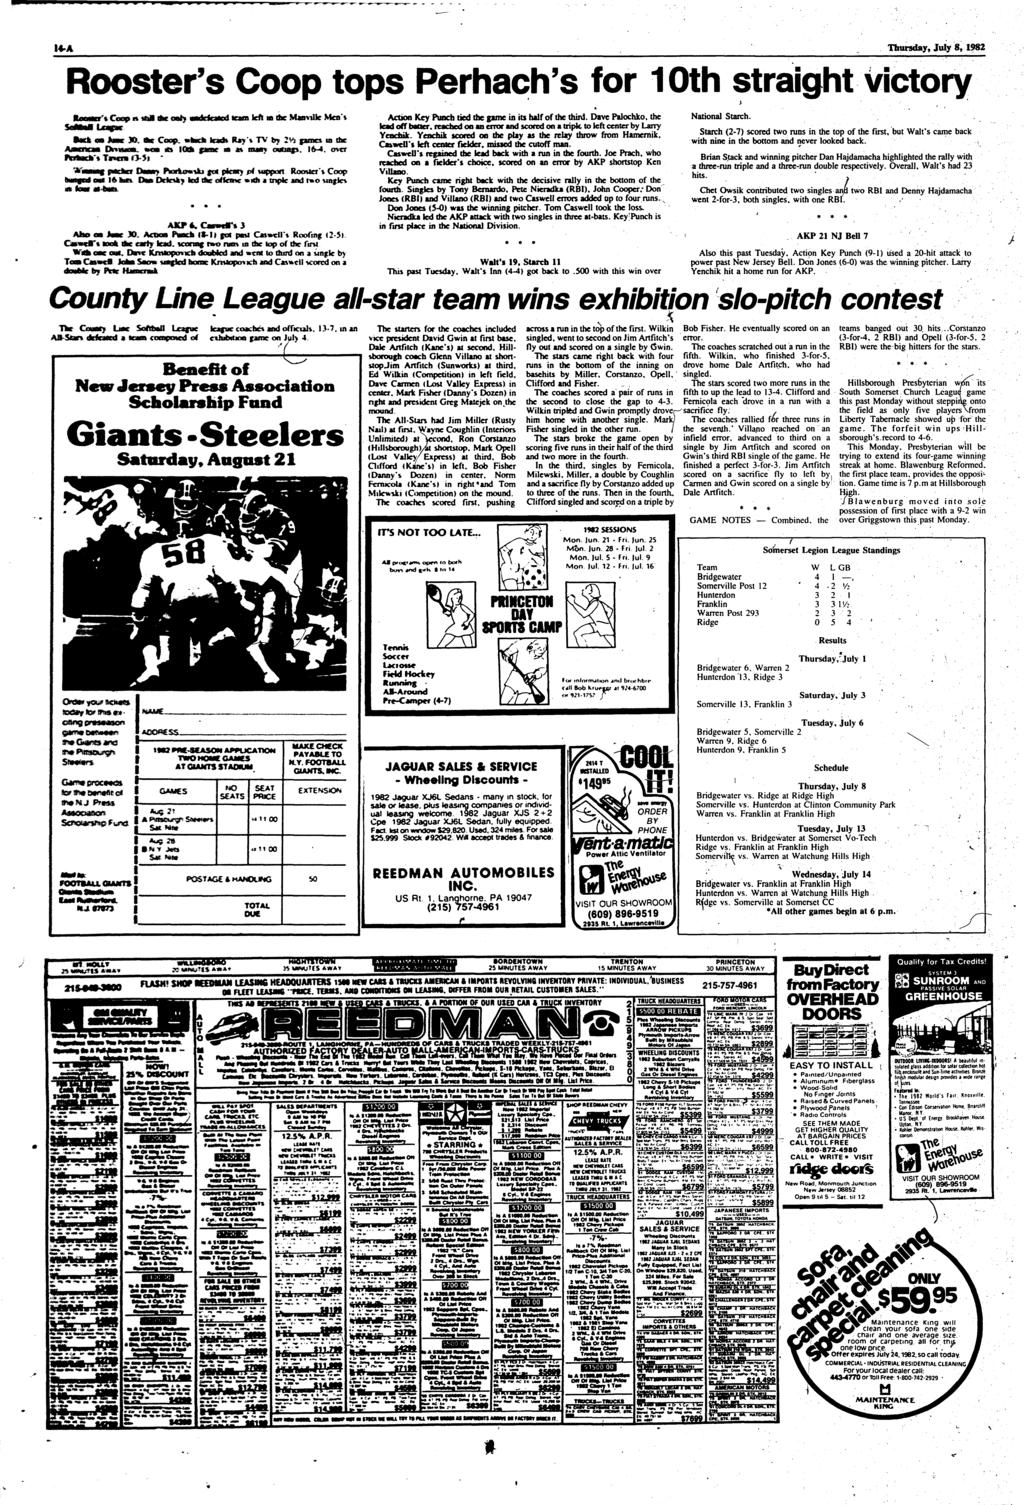 U-A Thursday, July 8, 1982 Rooster's Coop tops Perhach's for 10th straight victory ftotmot C<**> M -am UK «*> wkvatcrf team left n the MJJBYIUC Men* Rtdk m JWK JQL Coop, wfatc* lead* ifcrj* T V bv